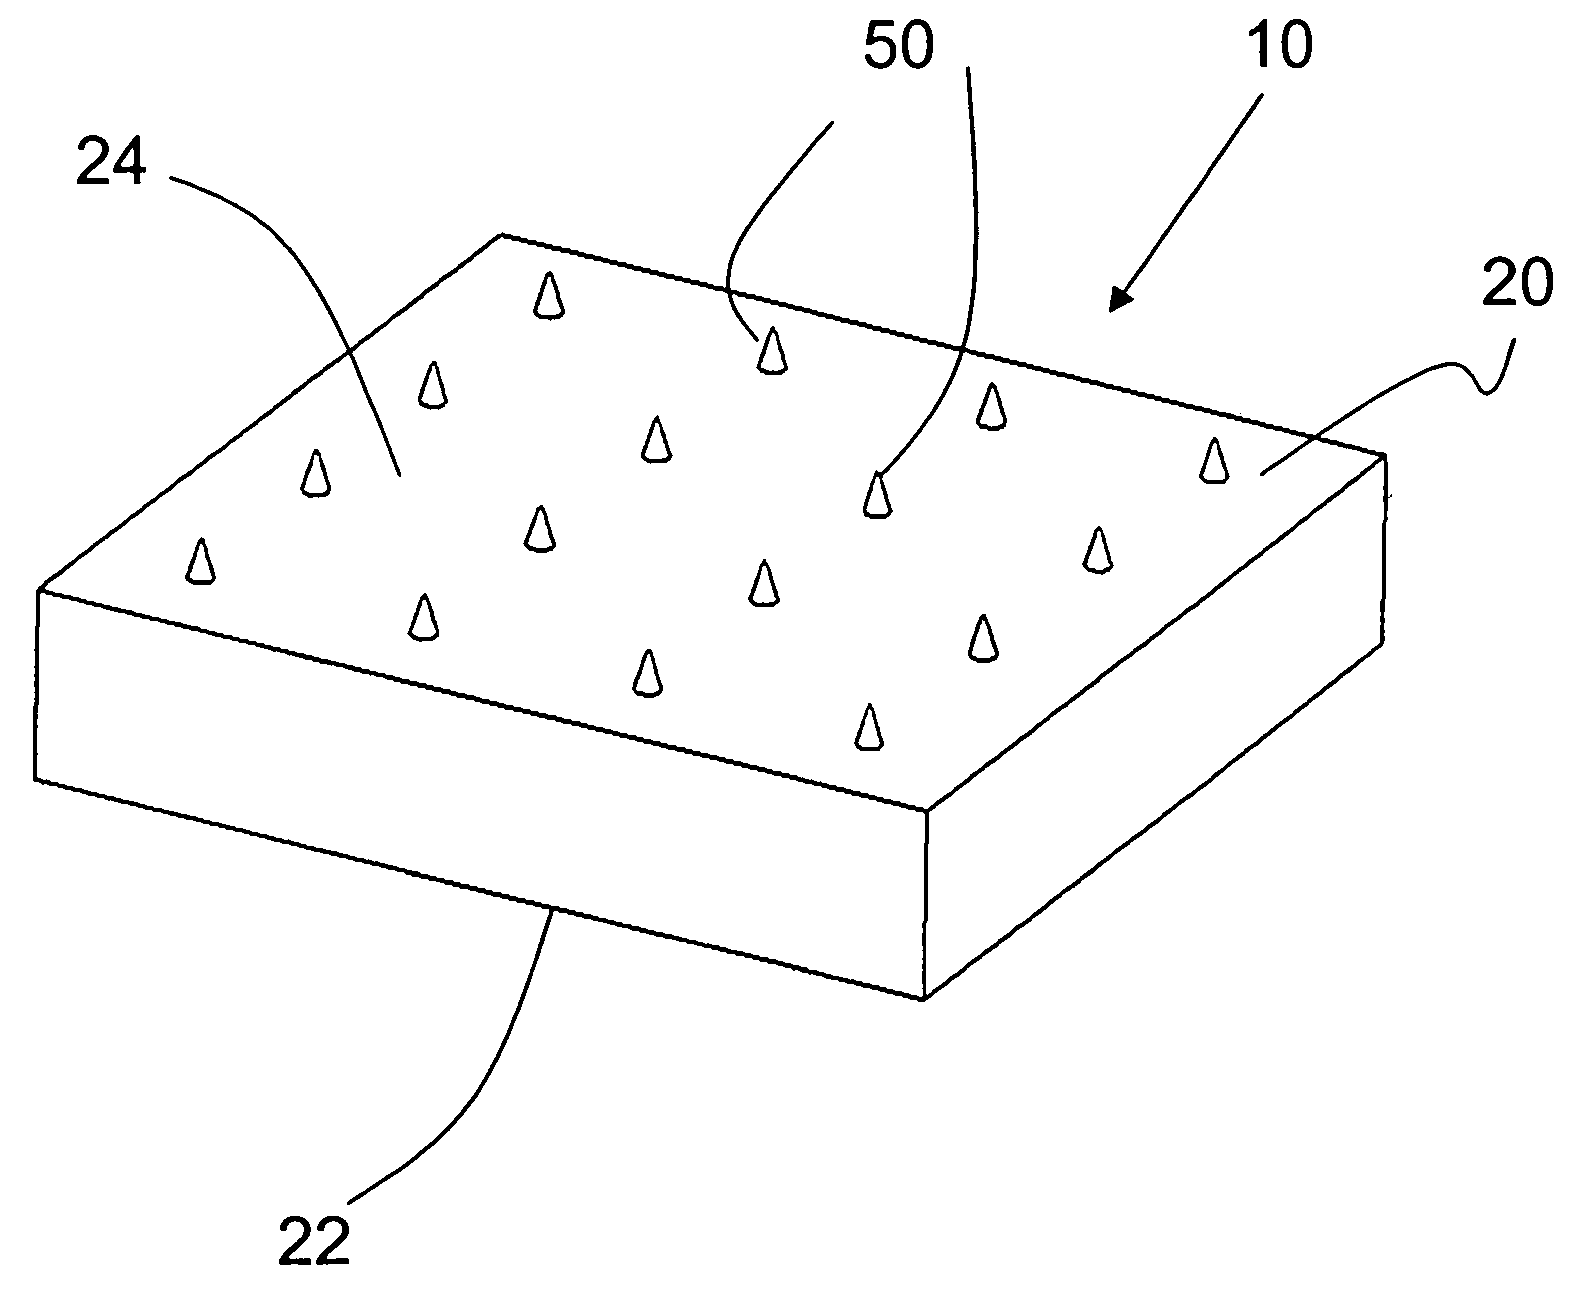 Microfluidic array devices and methods of manufacturing and uses thereof